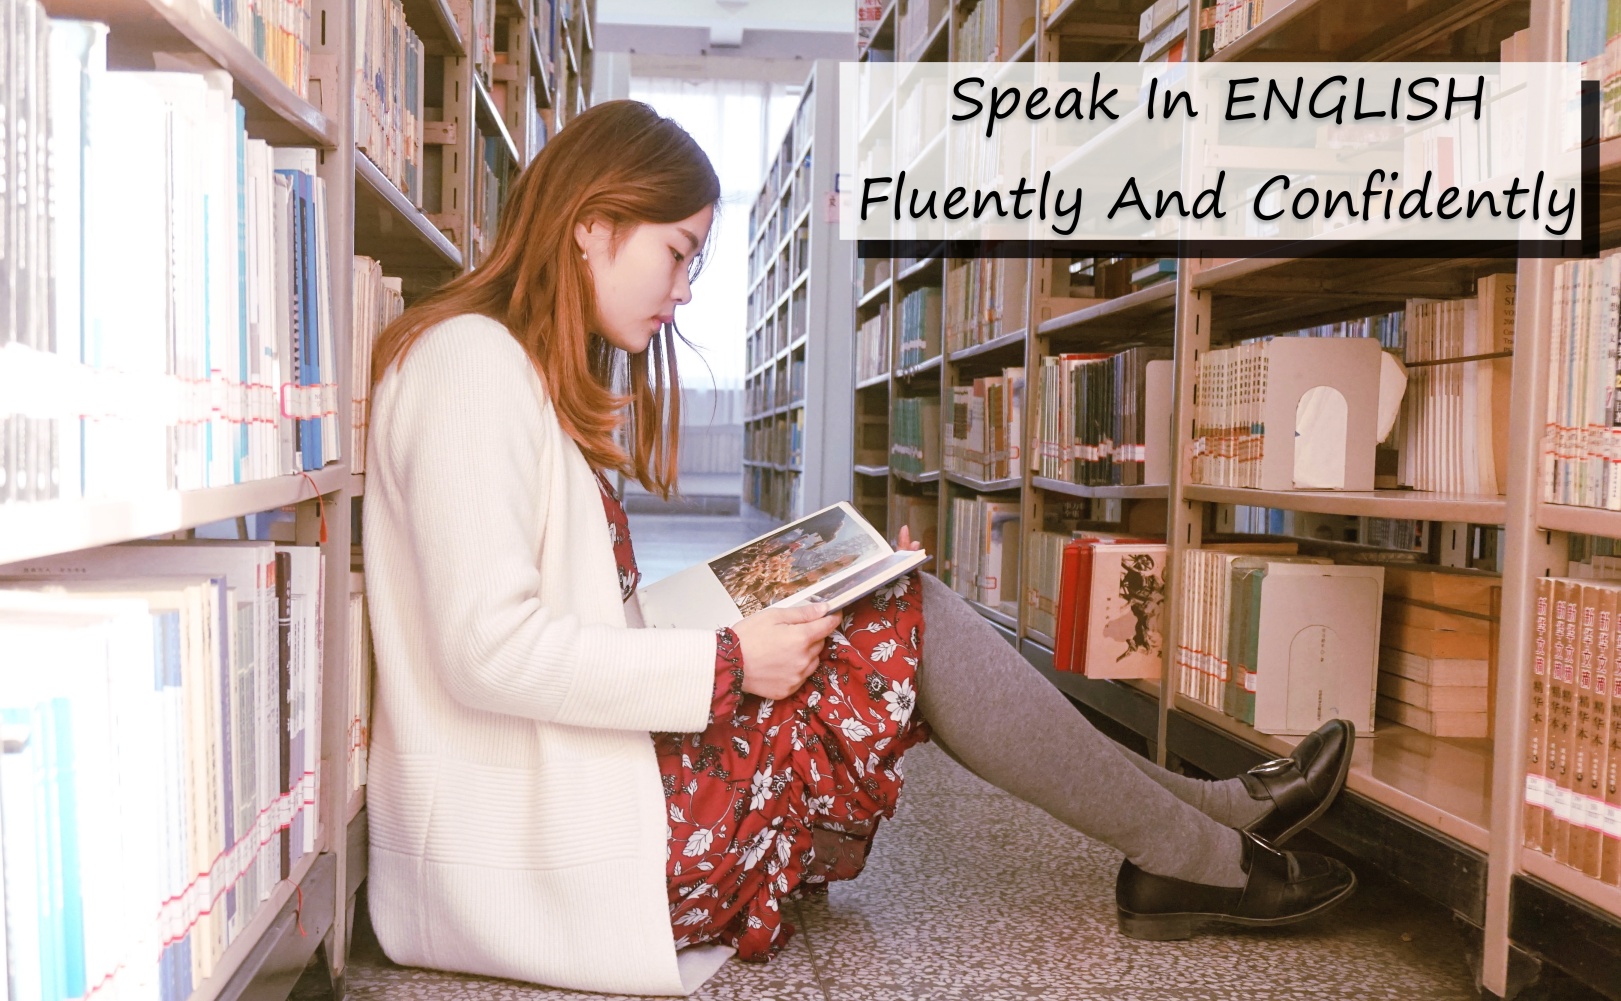 5 Easy Steps To Speak In ENGLISH Fluently And Confidently - zealstyle.com